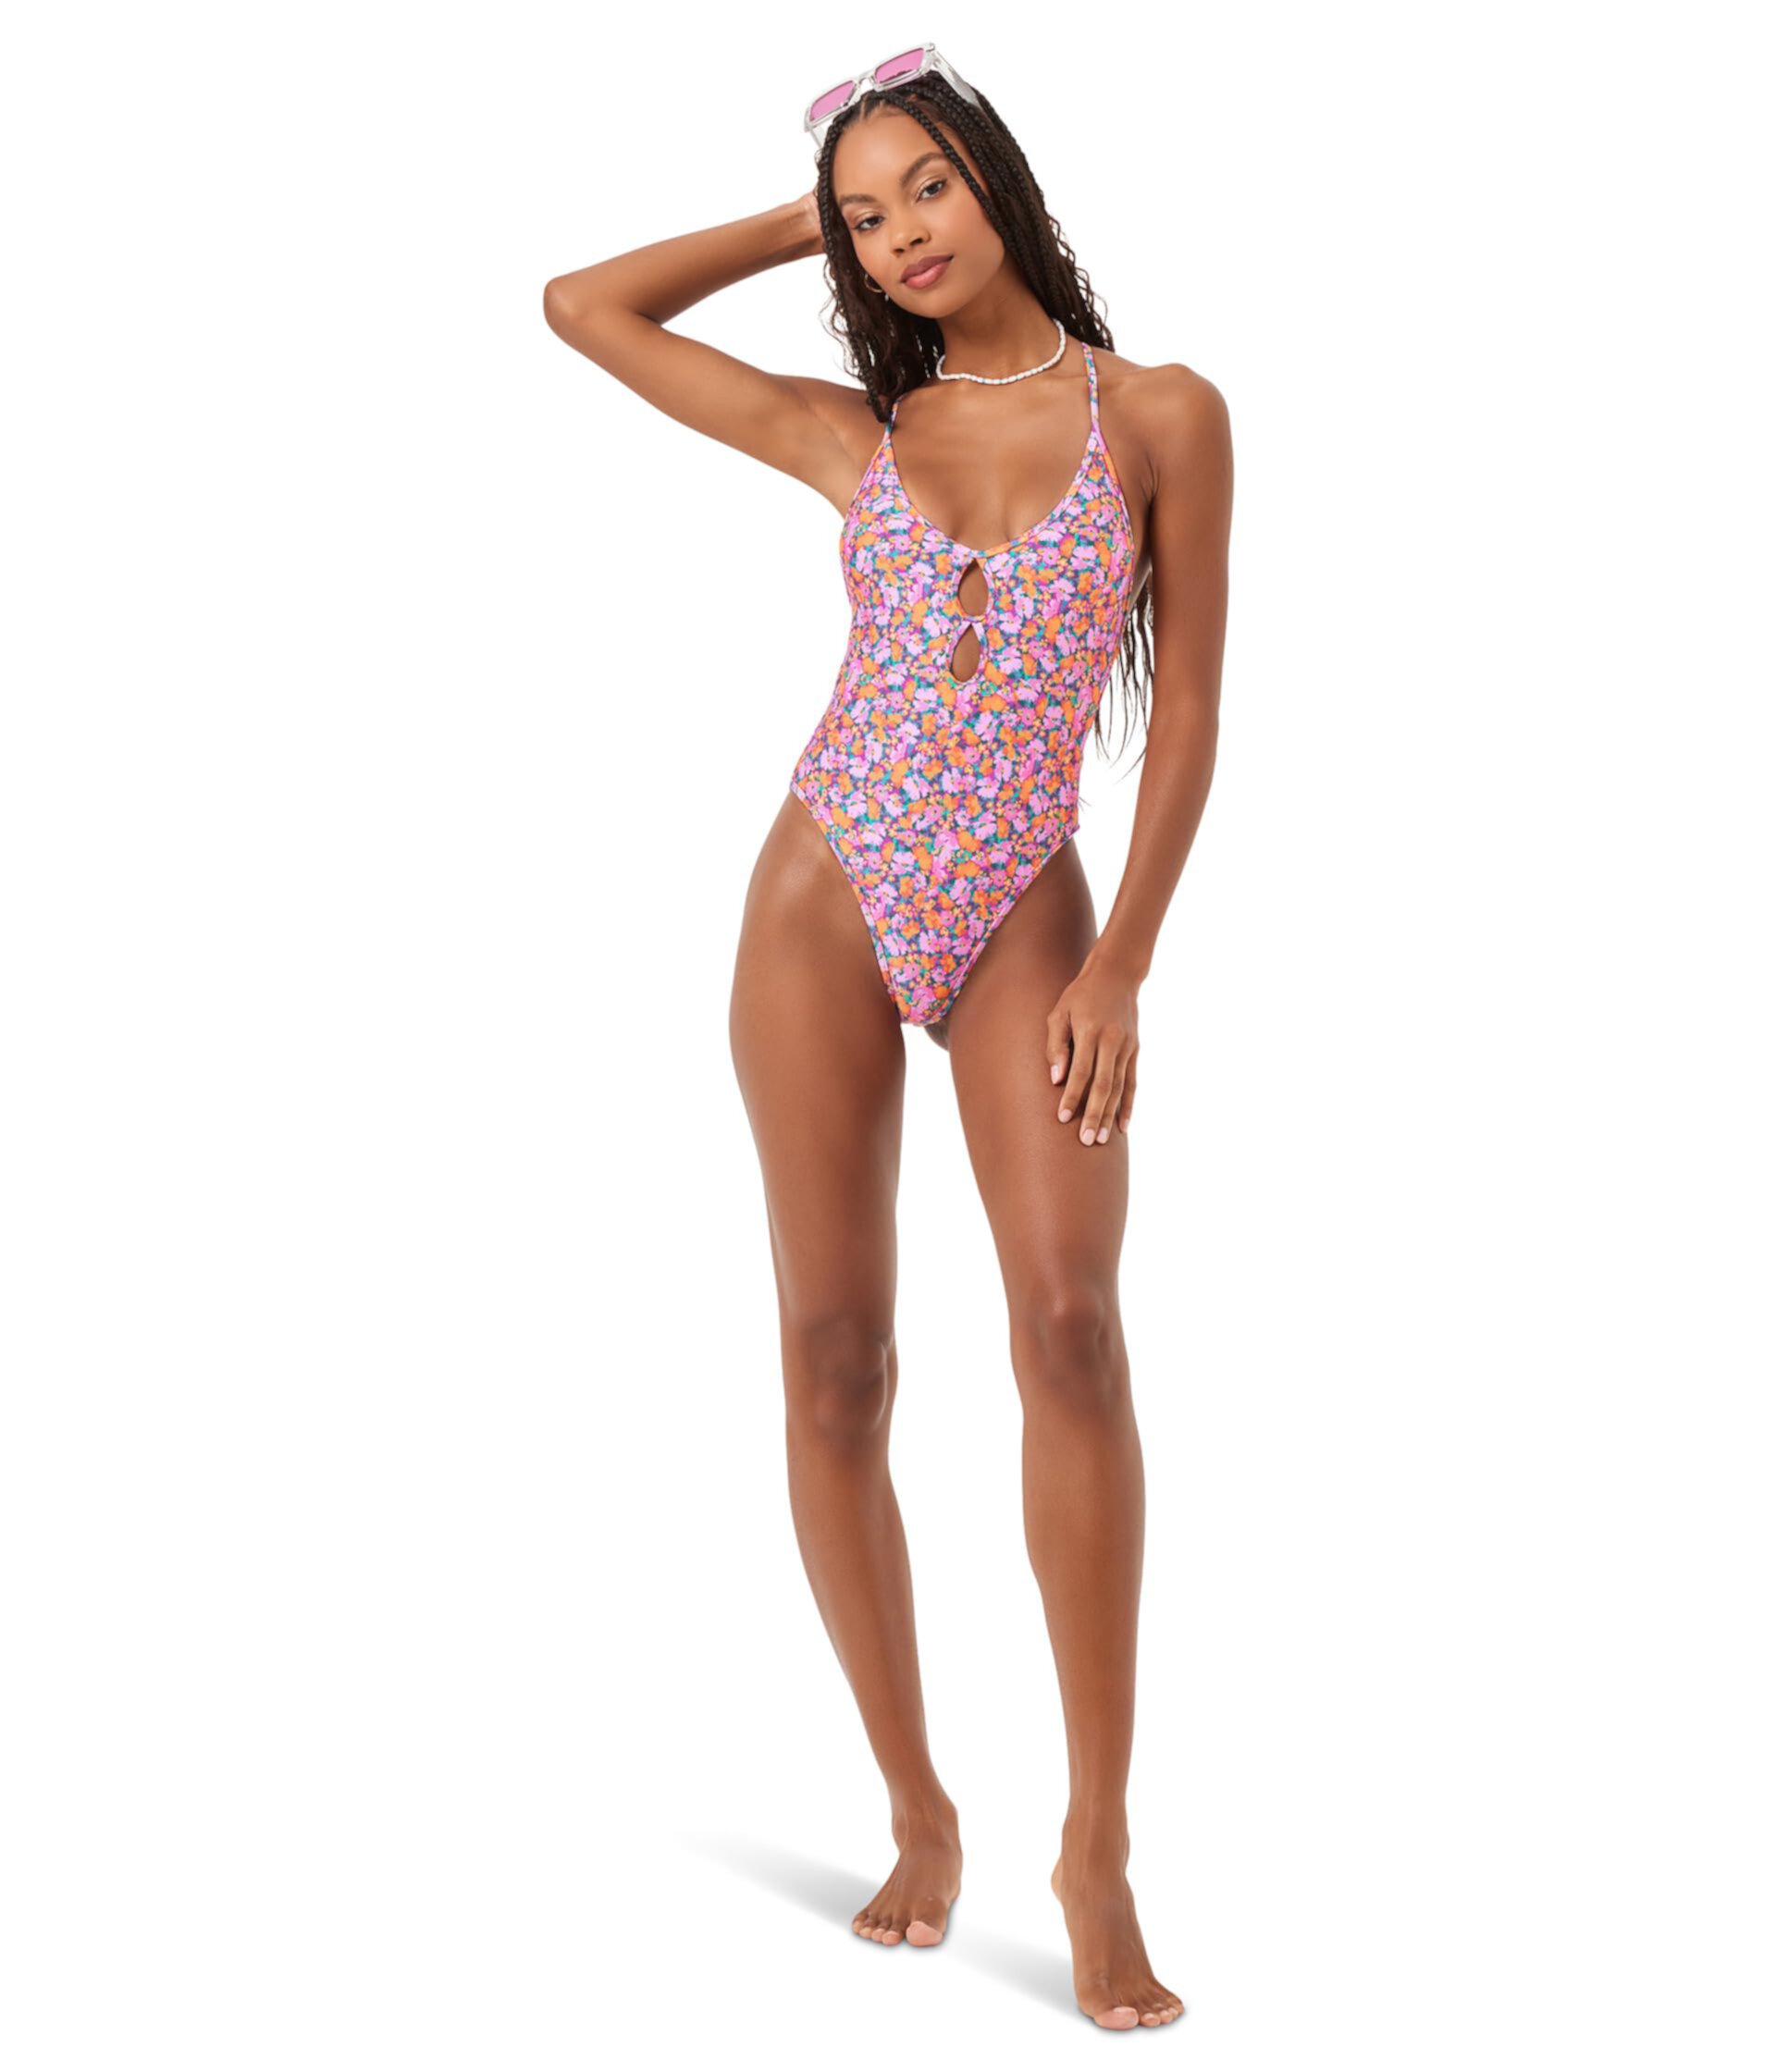 Clover One Piece Bitsy LSpace